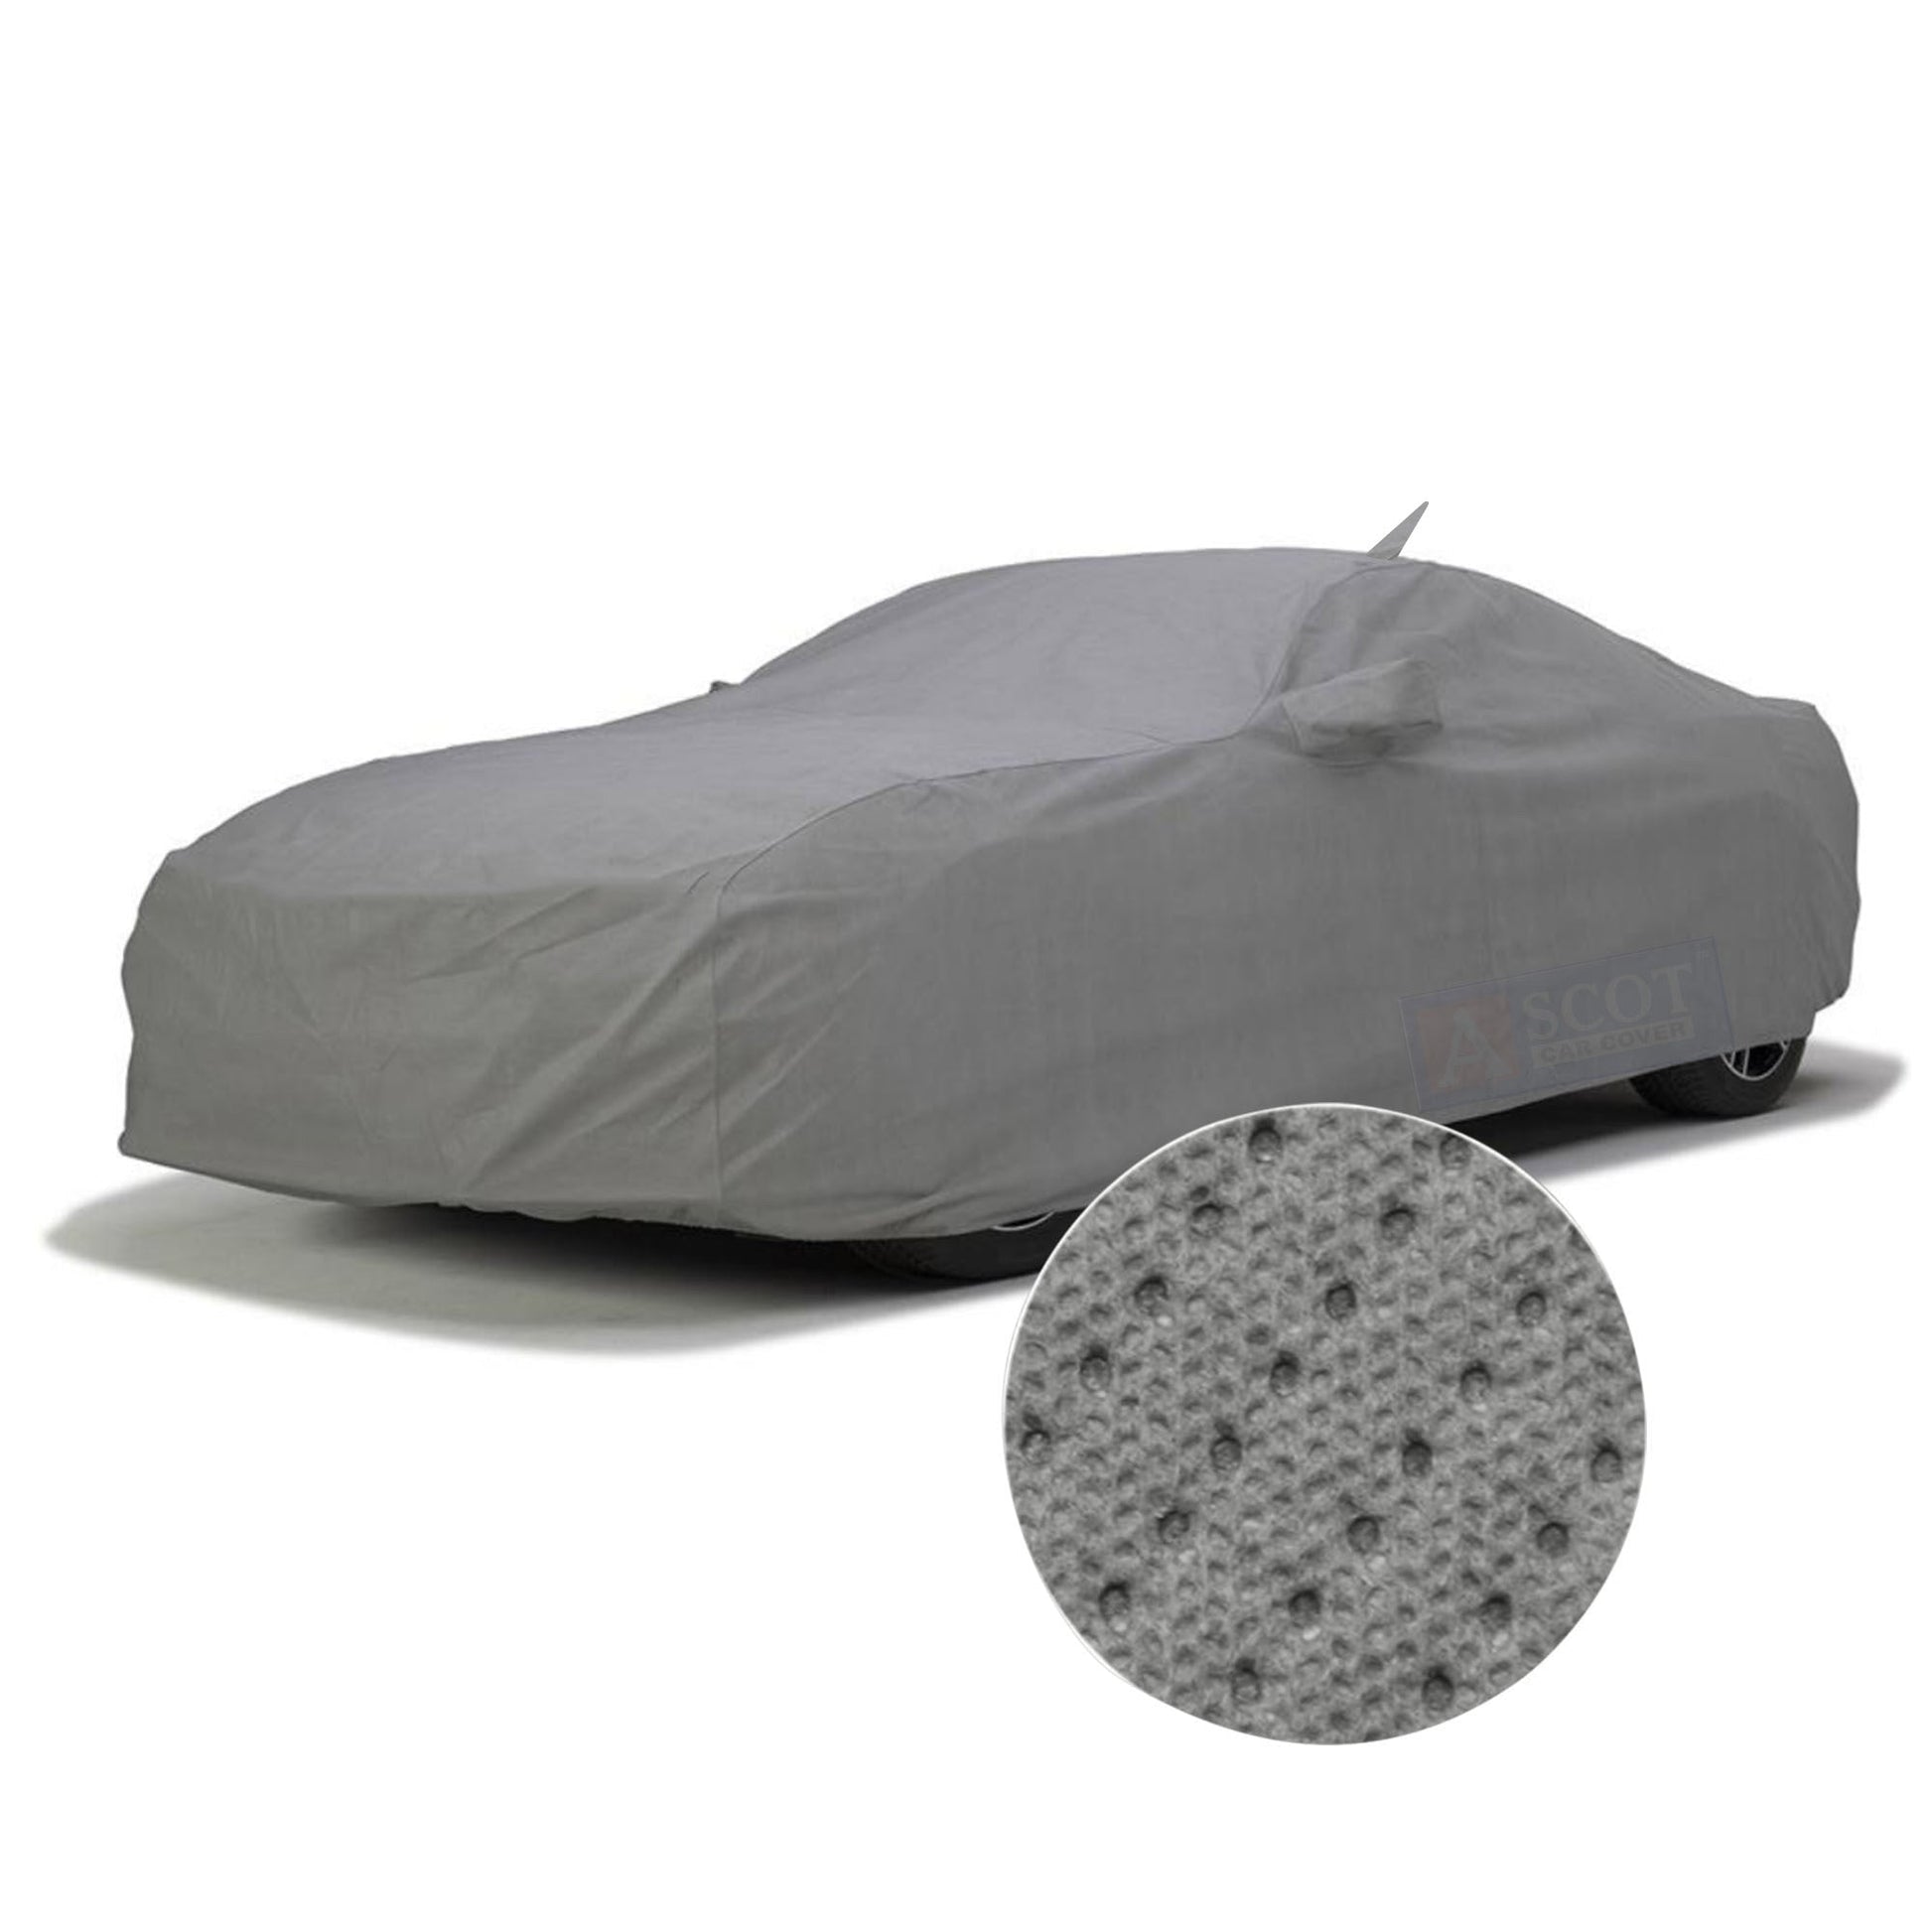 Outdoor car cover fits BMW 3-Series touring (E30) 100% waterproof now $ 210